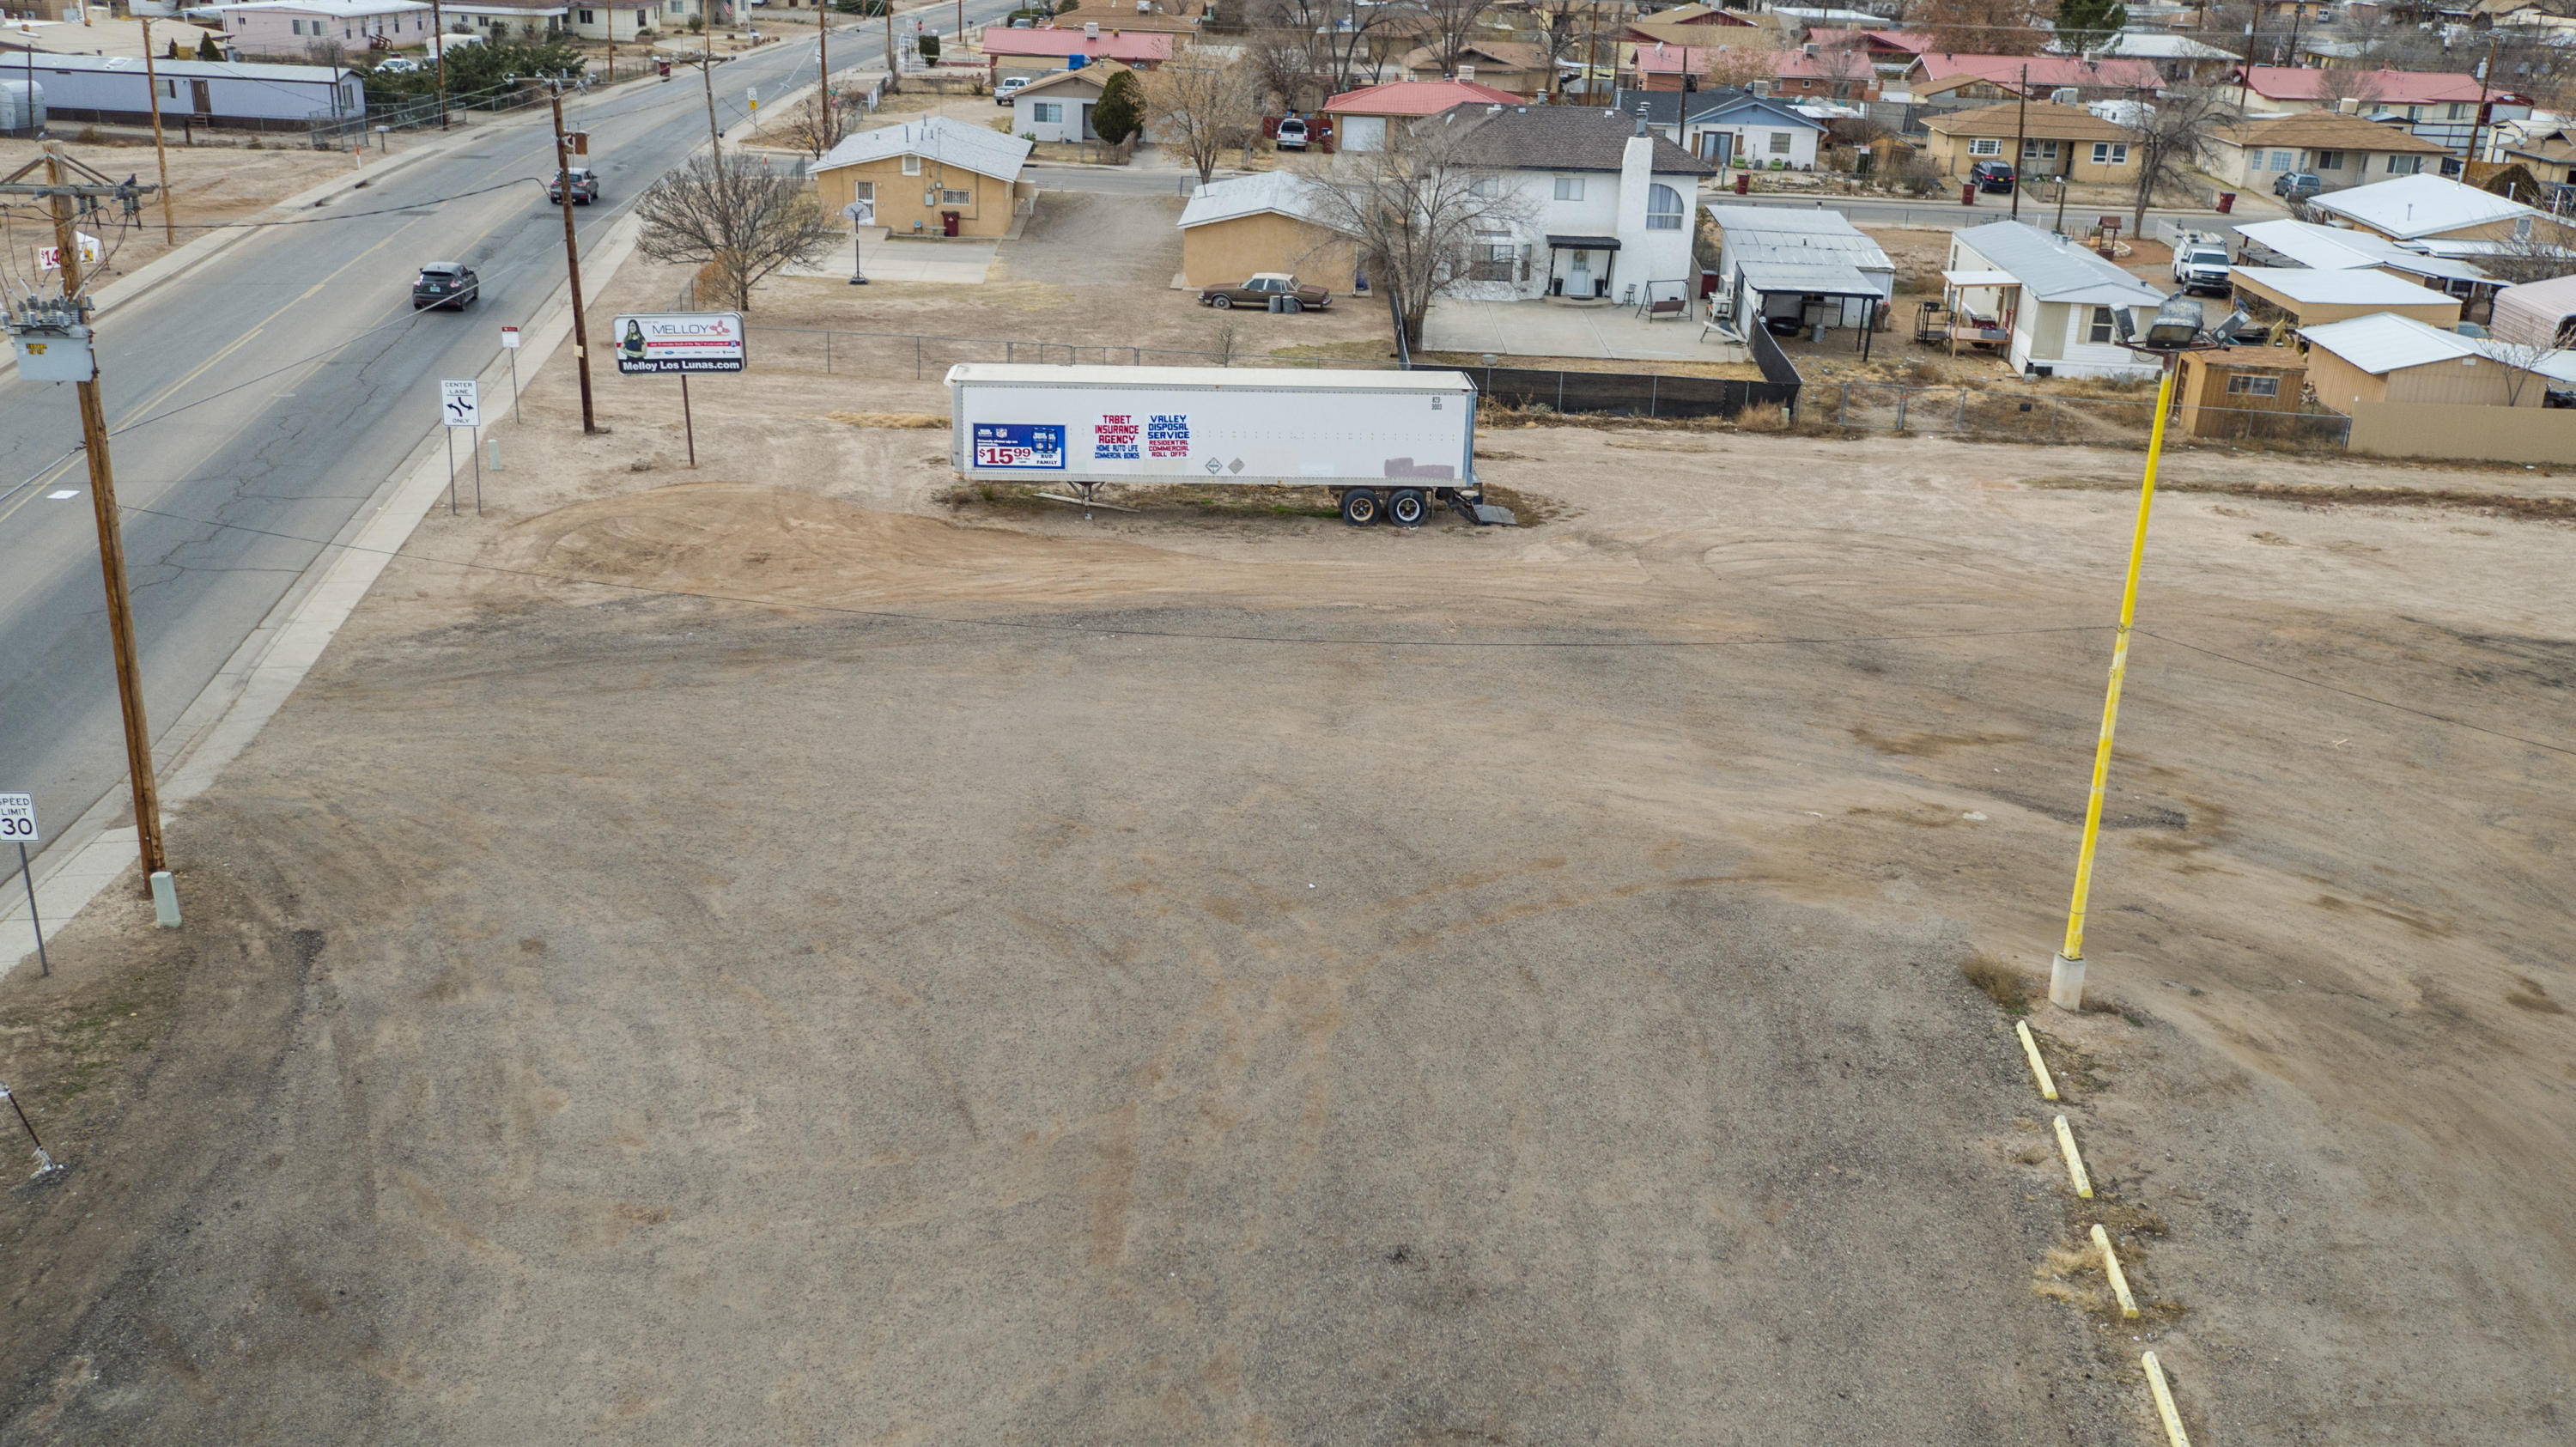 629 S Main Street, Belen, New Mexico 87002, ,Commercial Sale,For Sale,629 S Main Street,934733